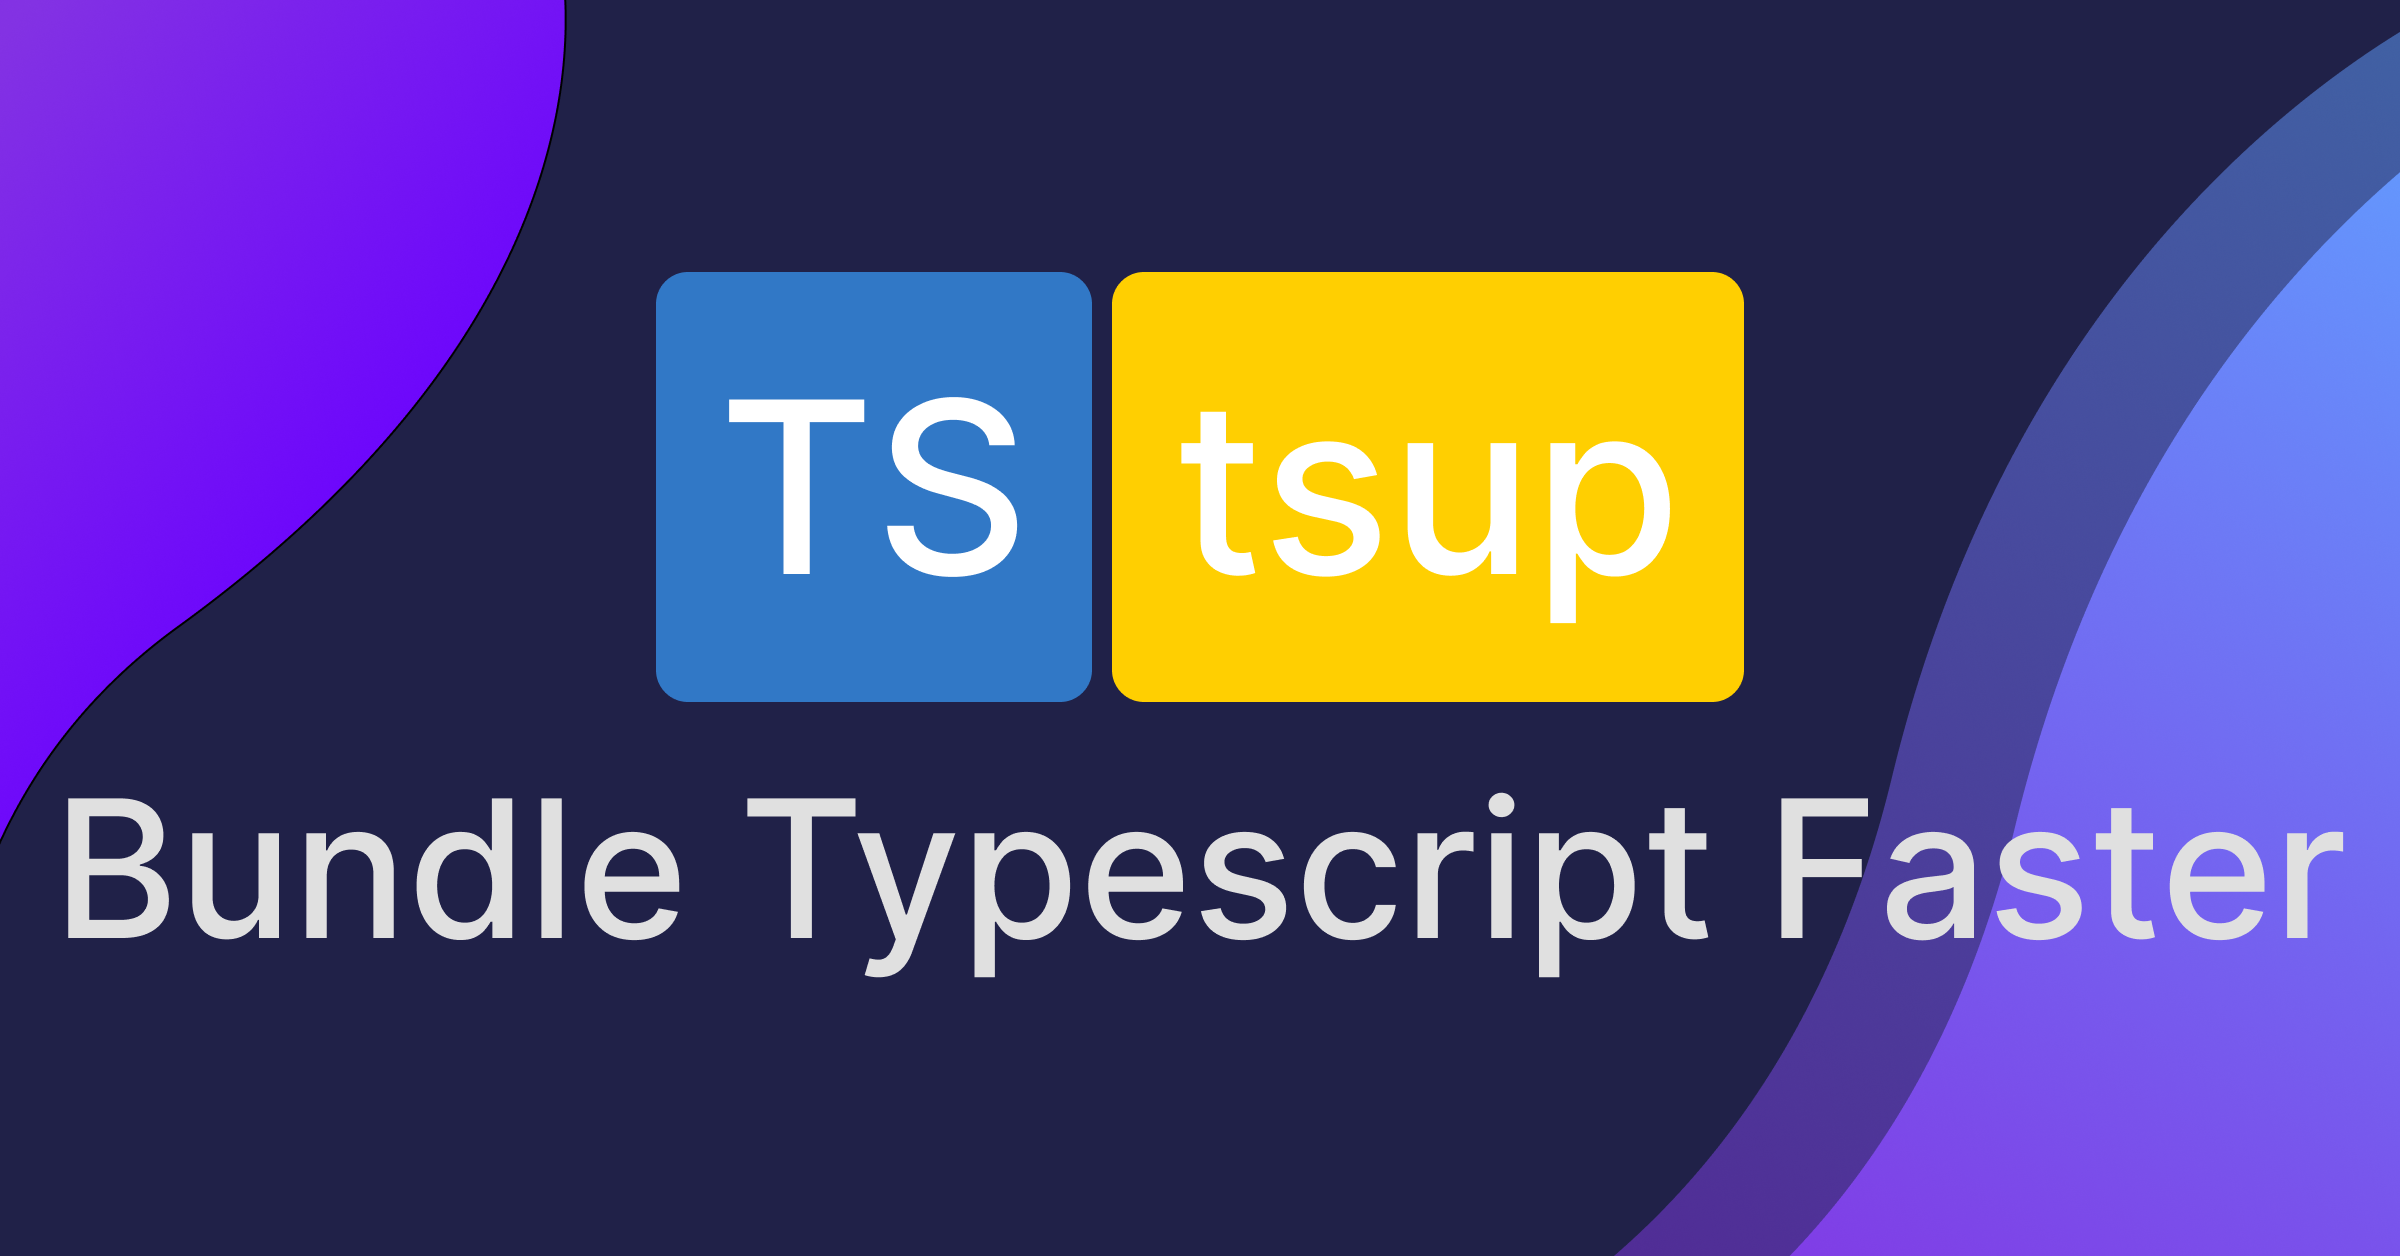 bundle typescript faster with tsup